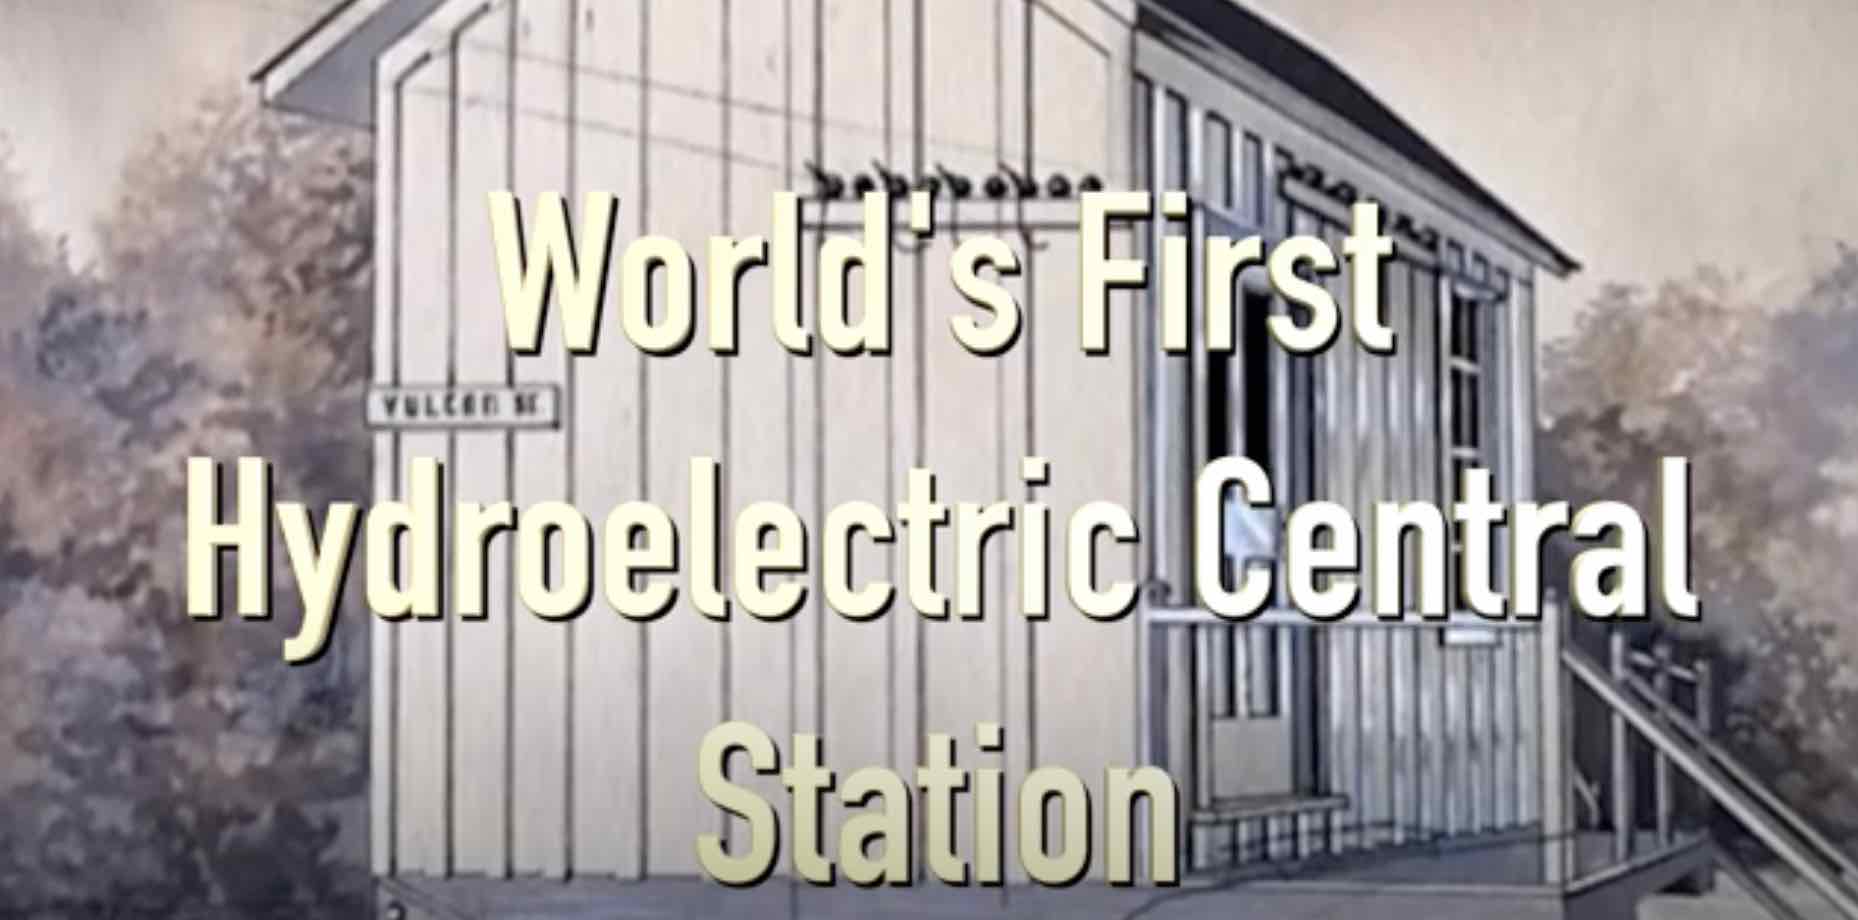 Enjoy this presentation from the Appleton Historical Society: The World's First Hydroelectric Central Station. 